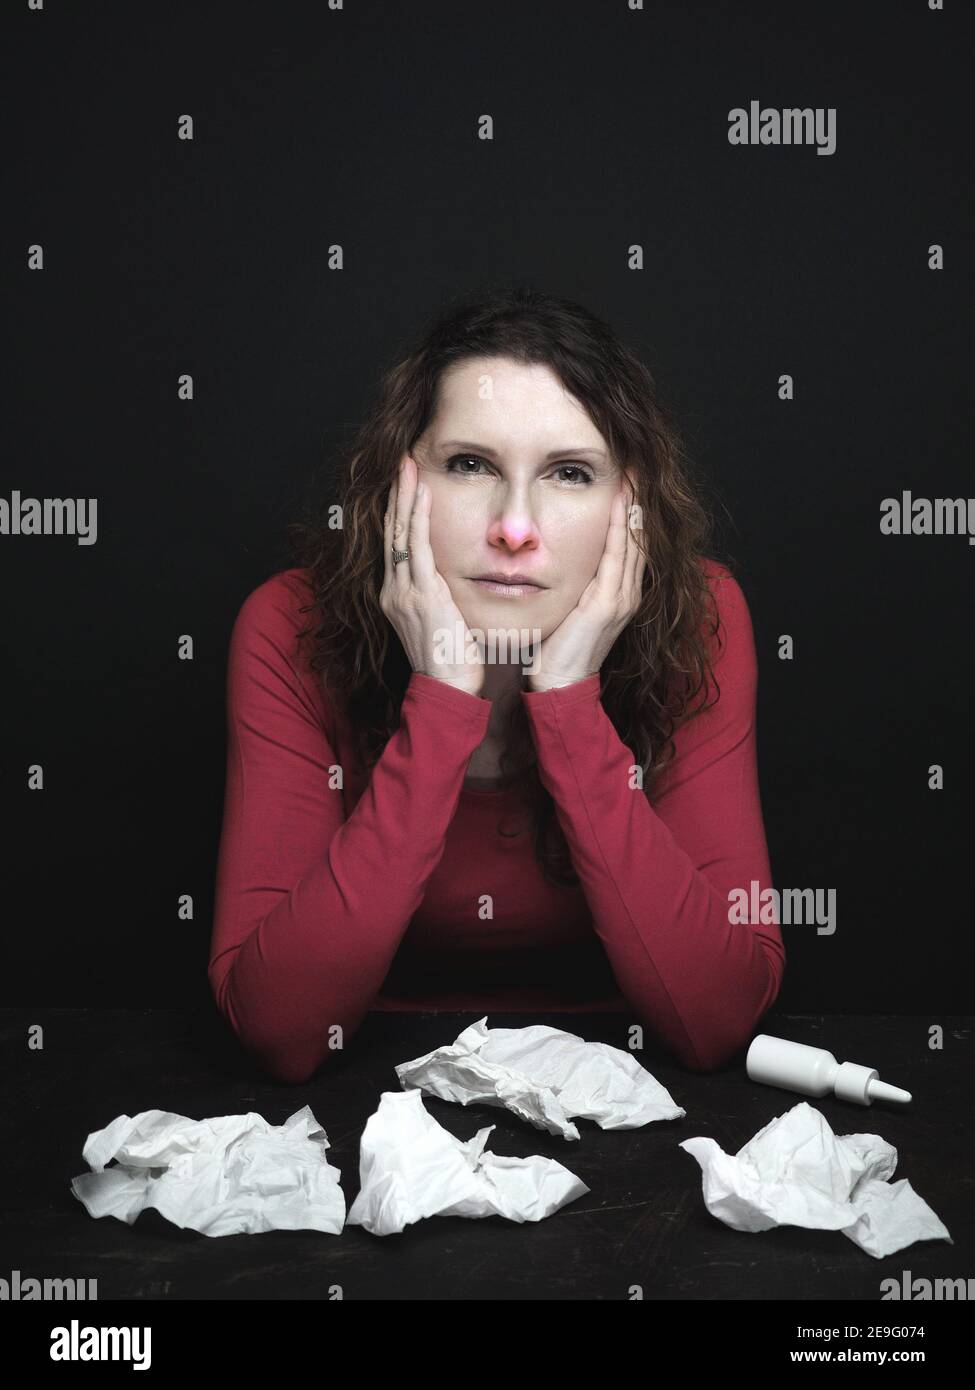 Caucasian woman with stuffy red nose and shiny eyes suffering from cold. Used paper tissues and nasal spray on the table. Copy space.  Stock Photo